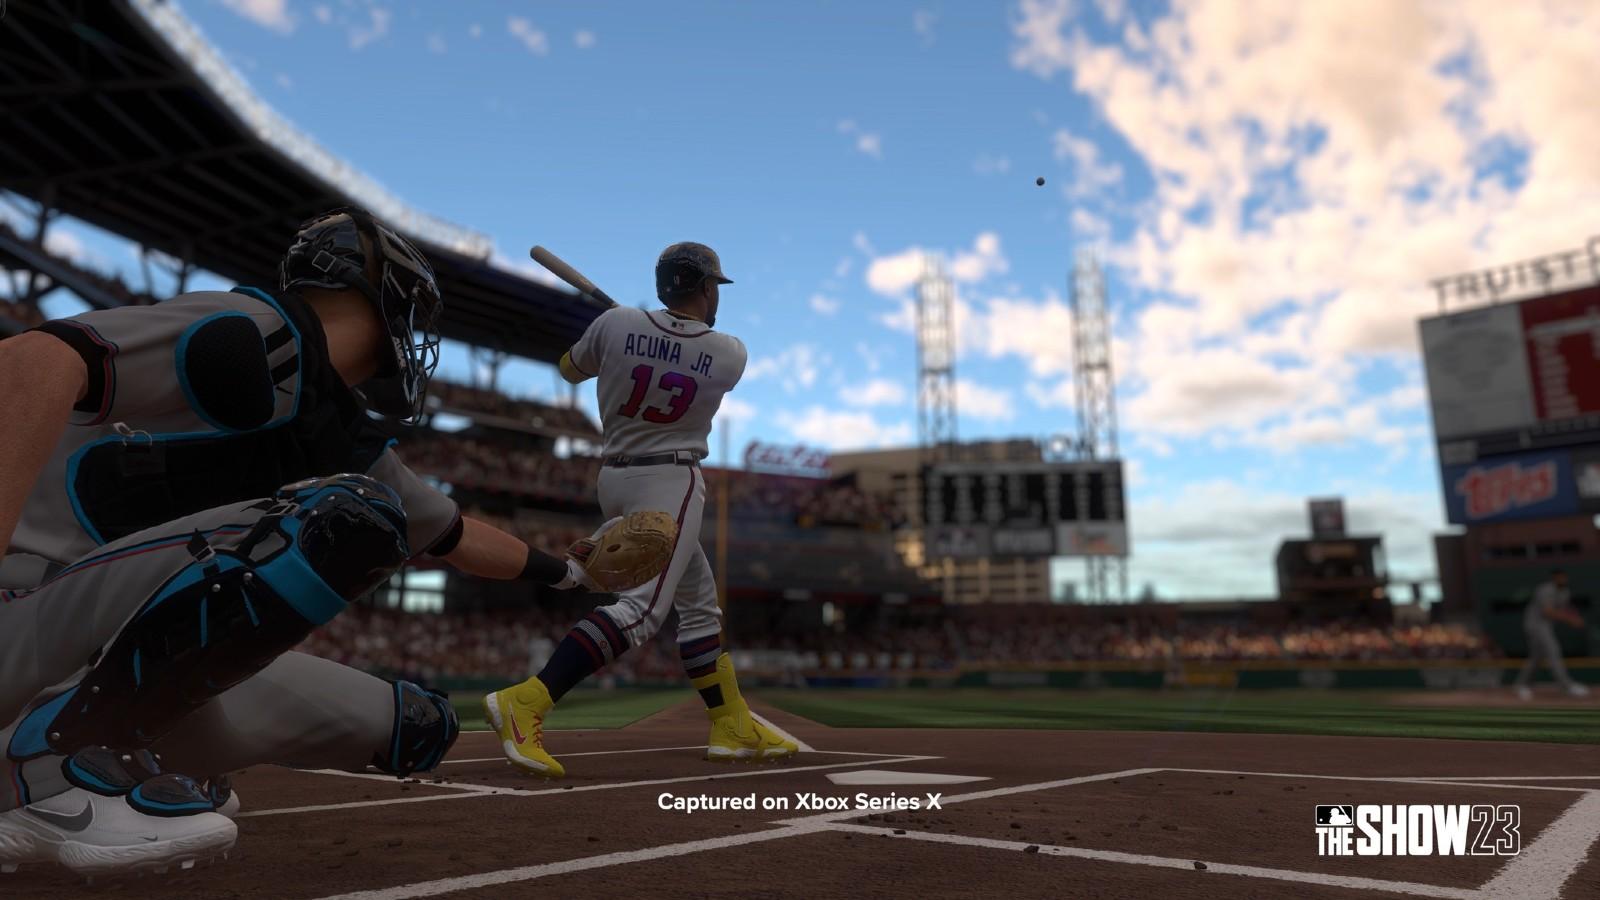 Beginner's Guide To Diamond Dynasty In MLB The Show 23